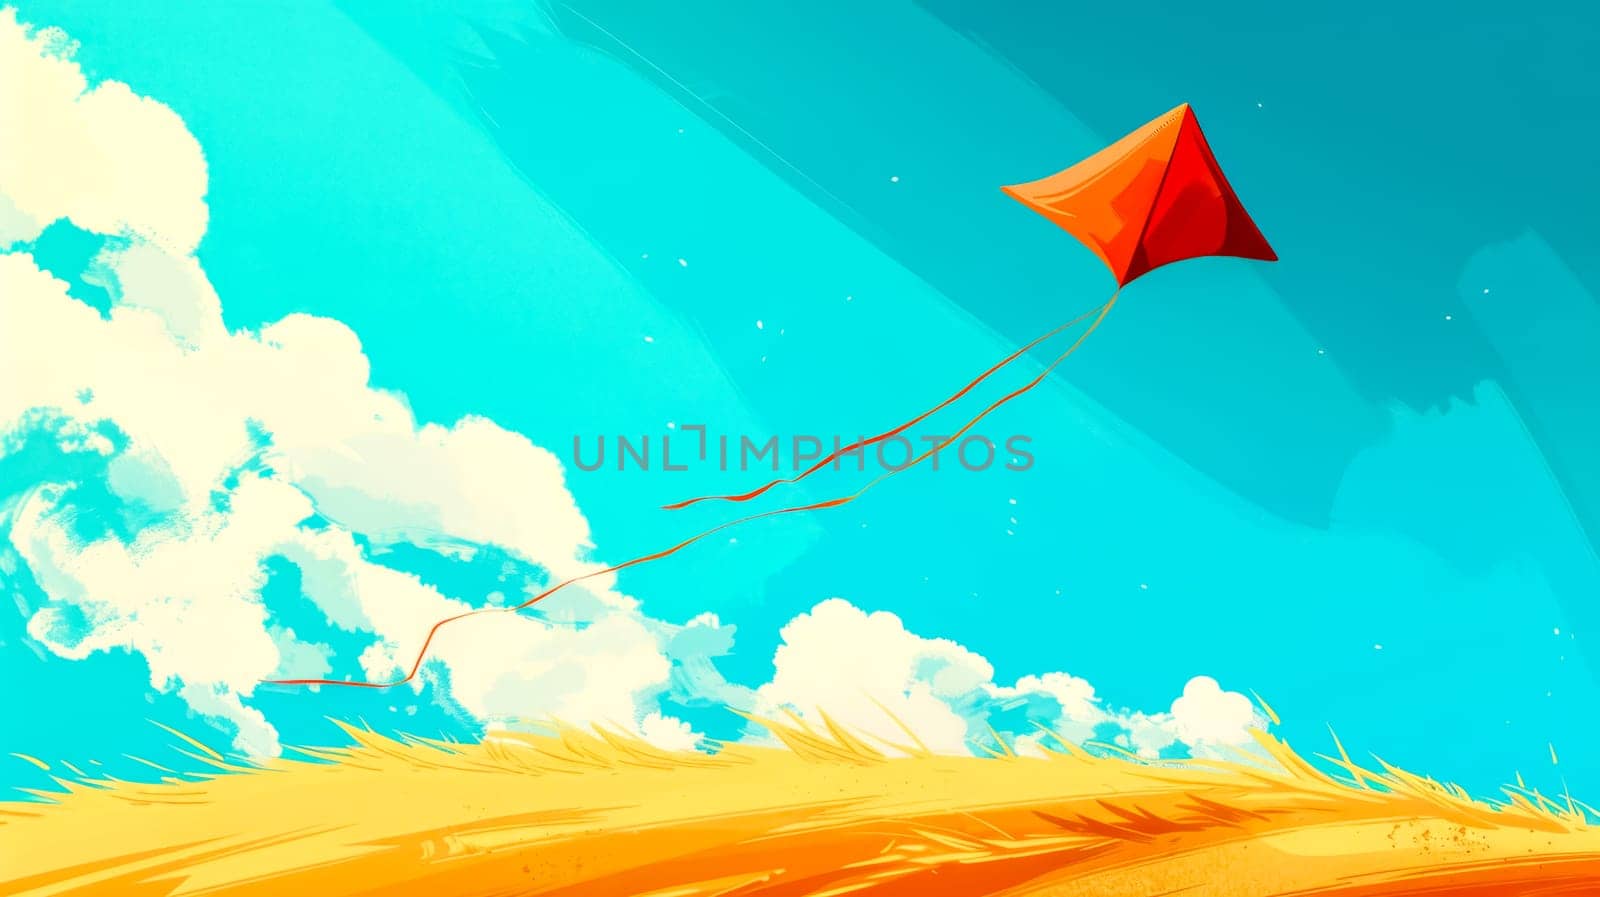 Illustration of a bright orange kite soaring in the sky with fluffy clouds